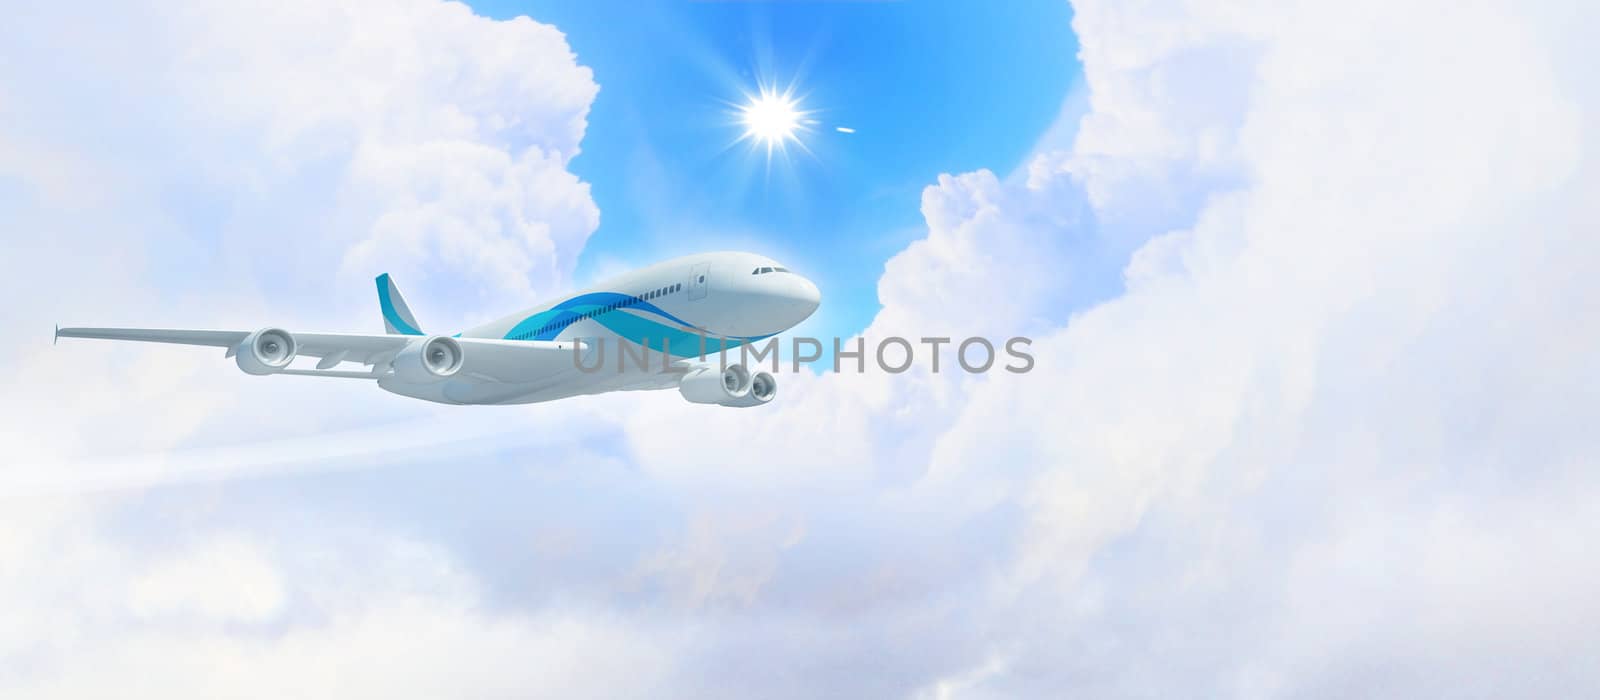 White passenger plane flying in the blue sky with white clouds around